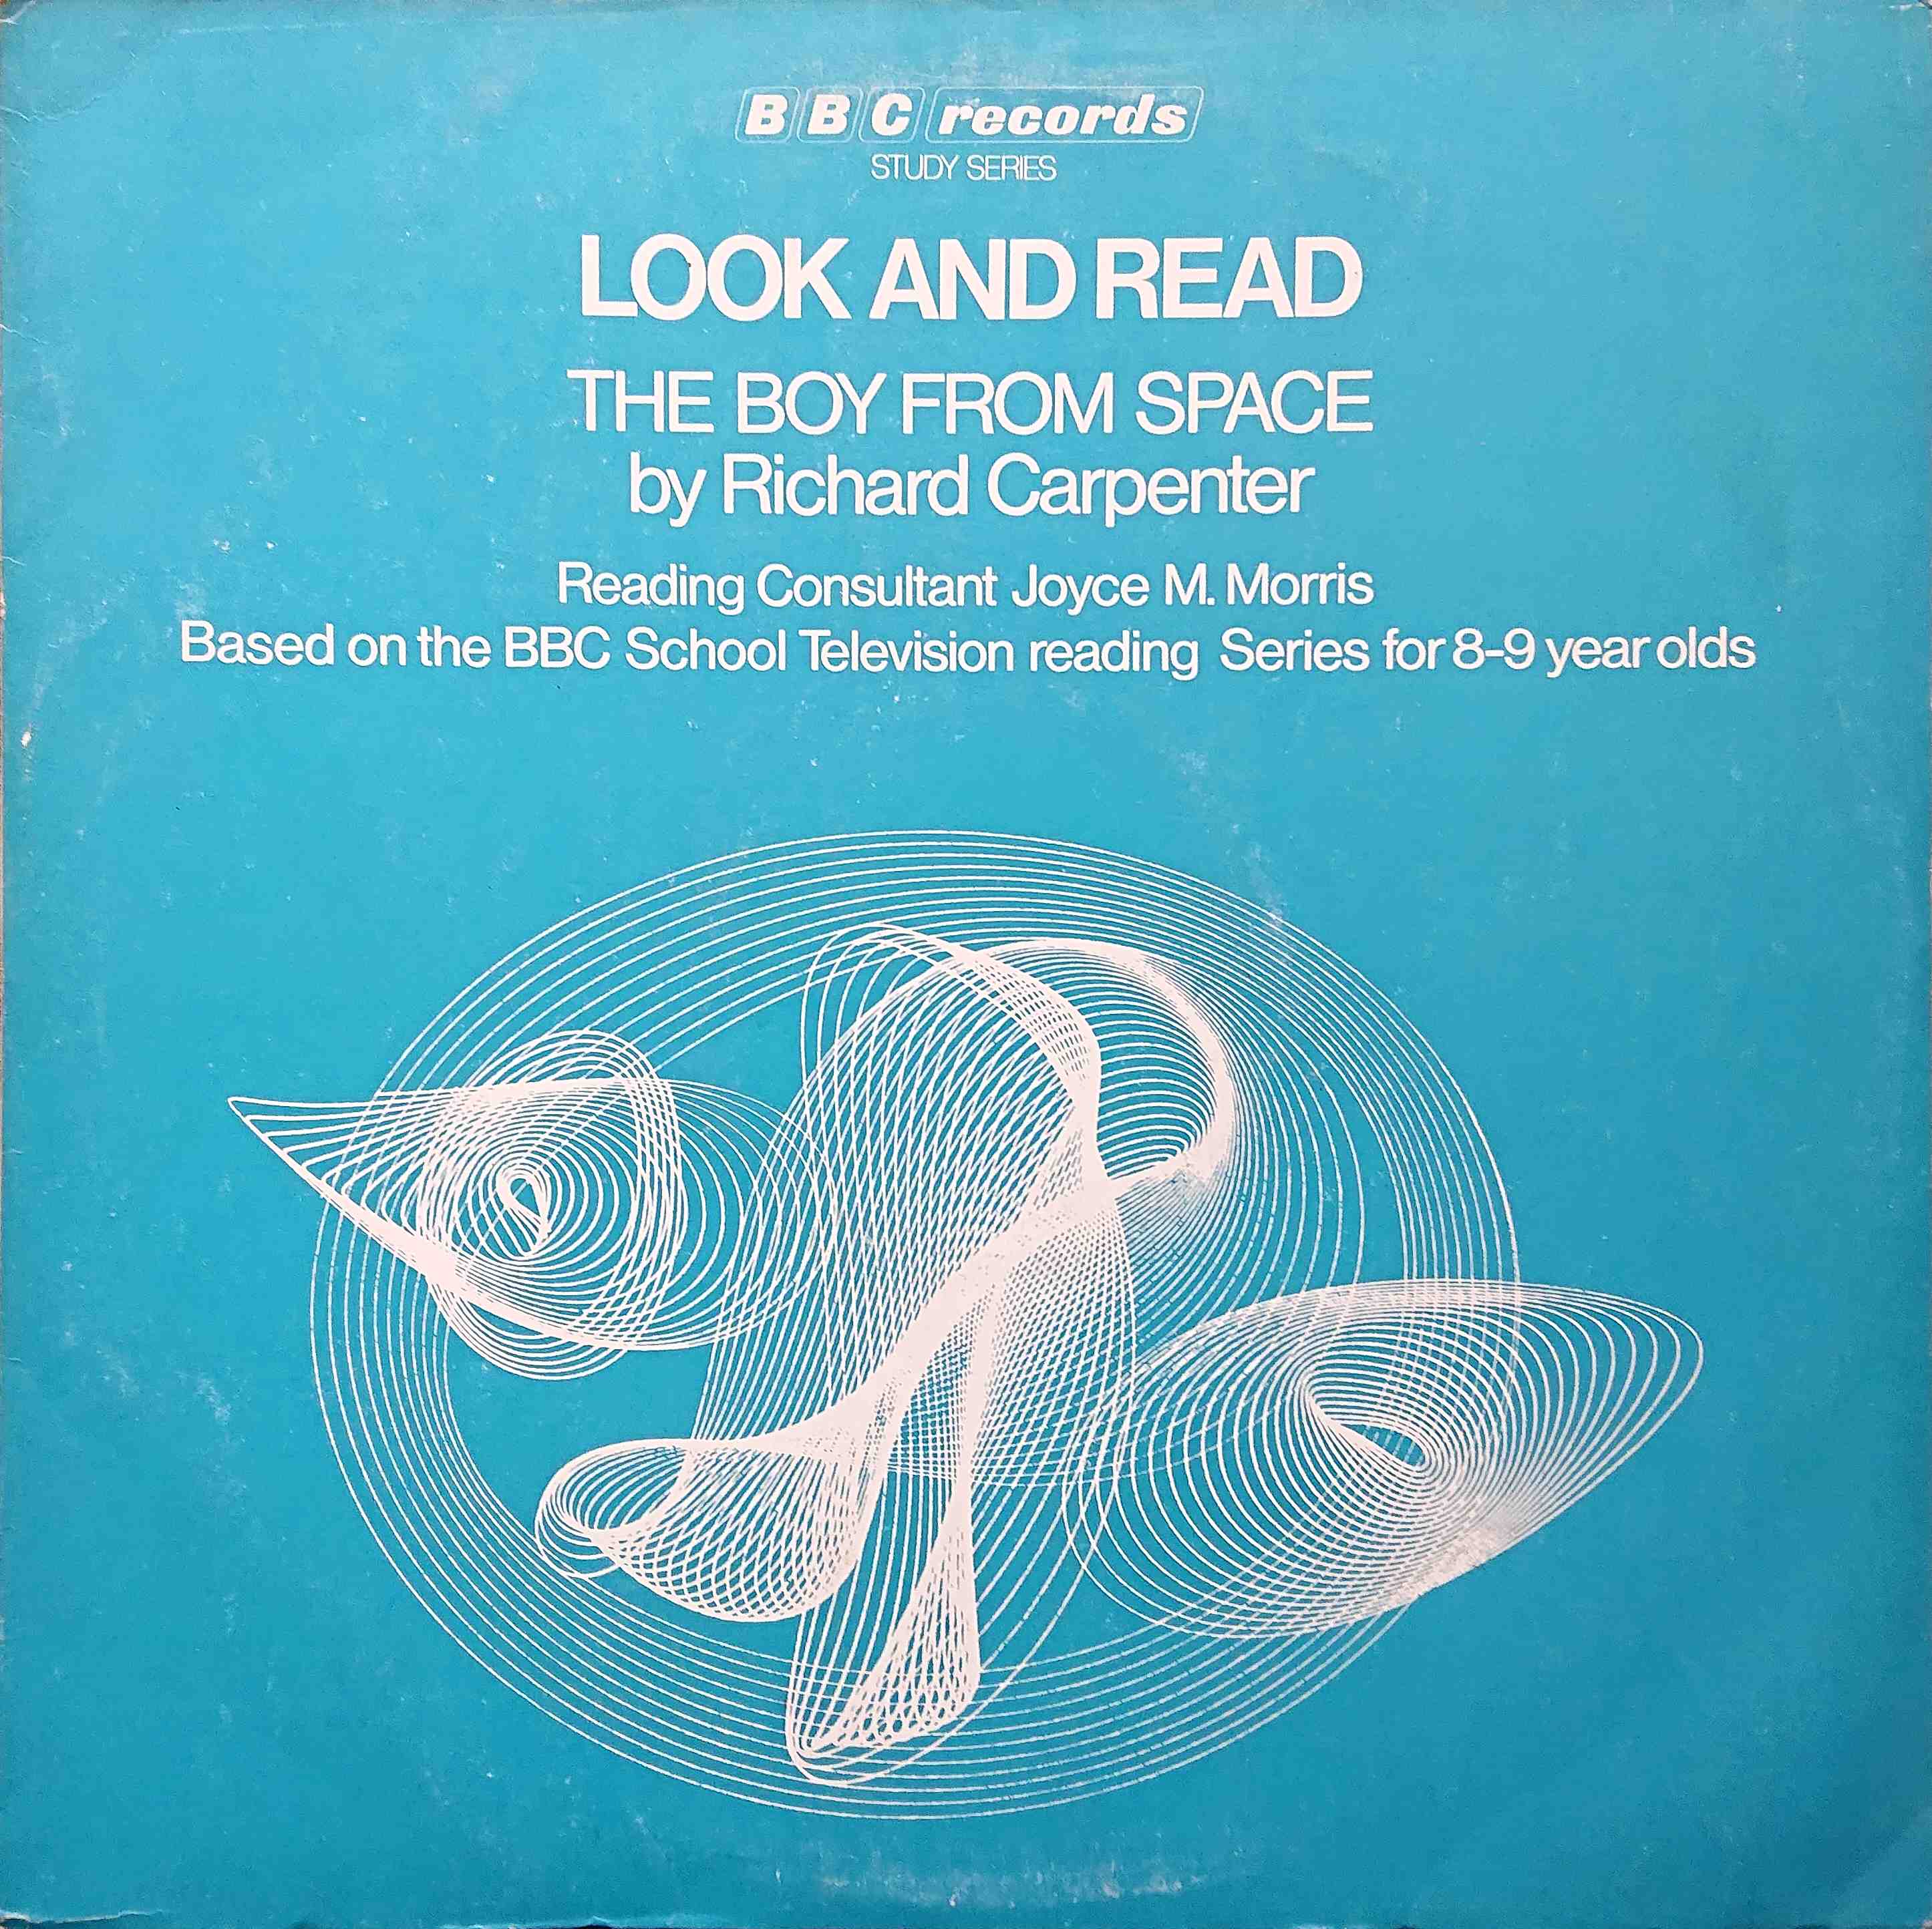 Picture of Look and read - The boy from space  by artist Richard Carpenter from the BBC albums - Records and Tapes library